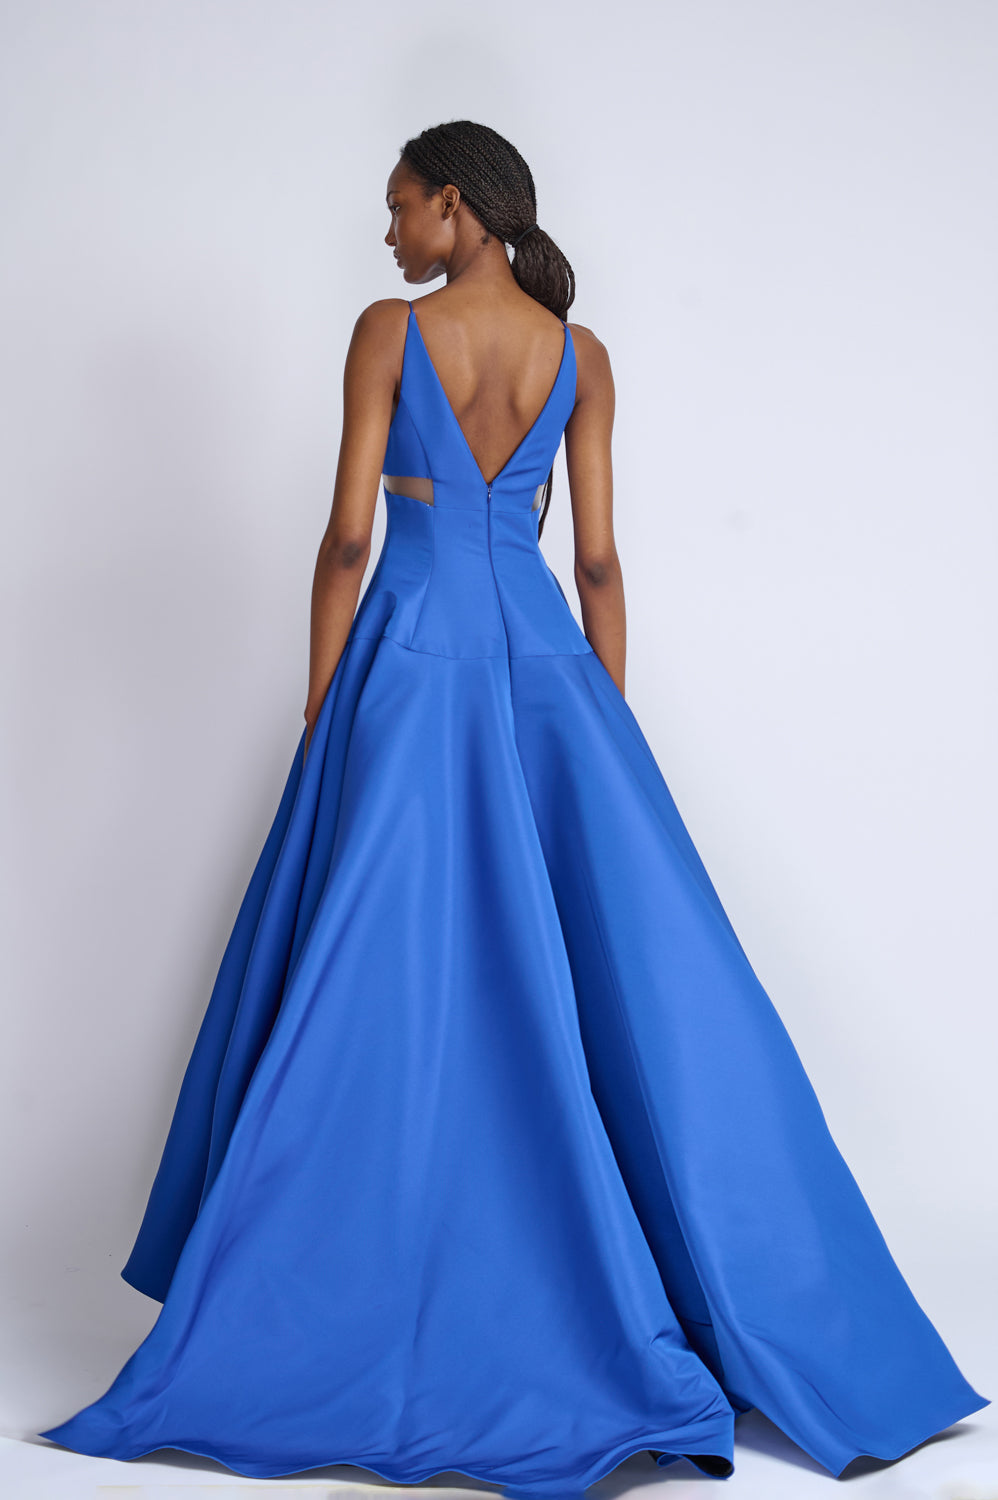 Yves Blue Faille Ball Gown With Sheer Inserts 3